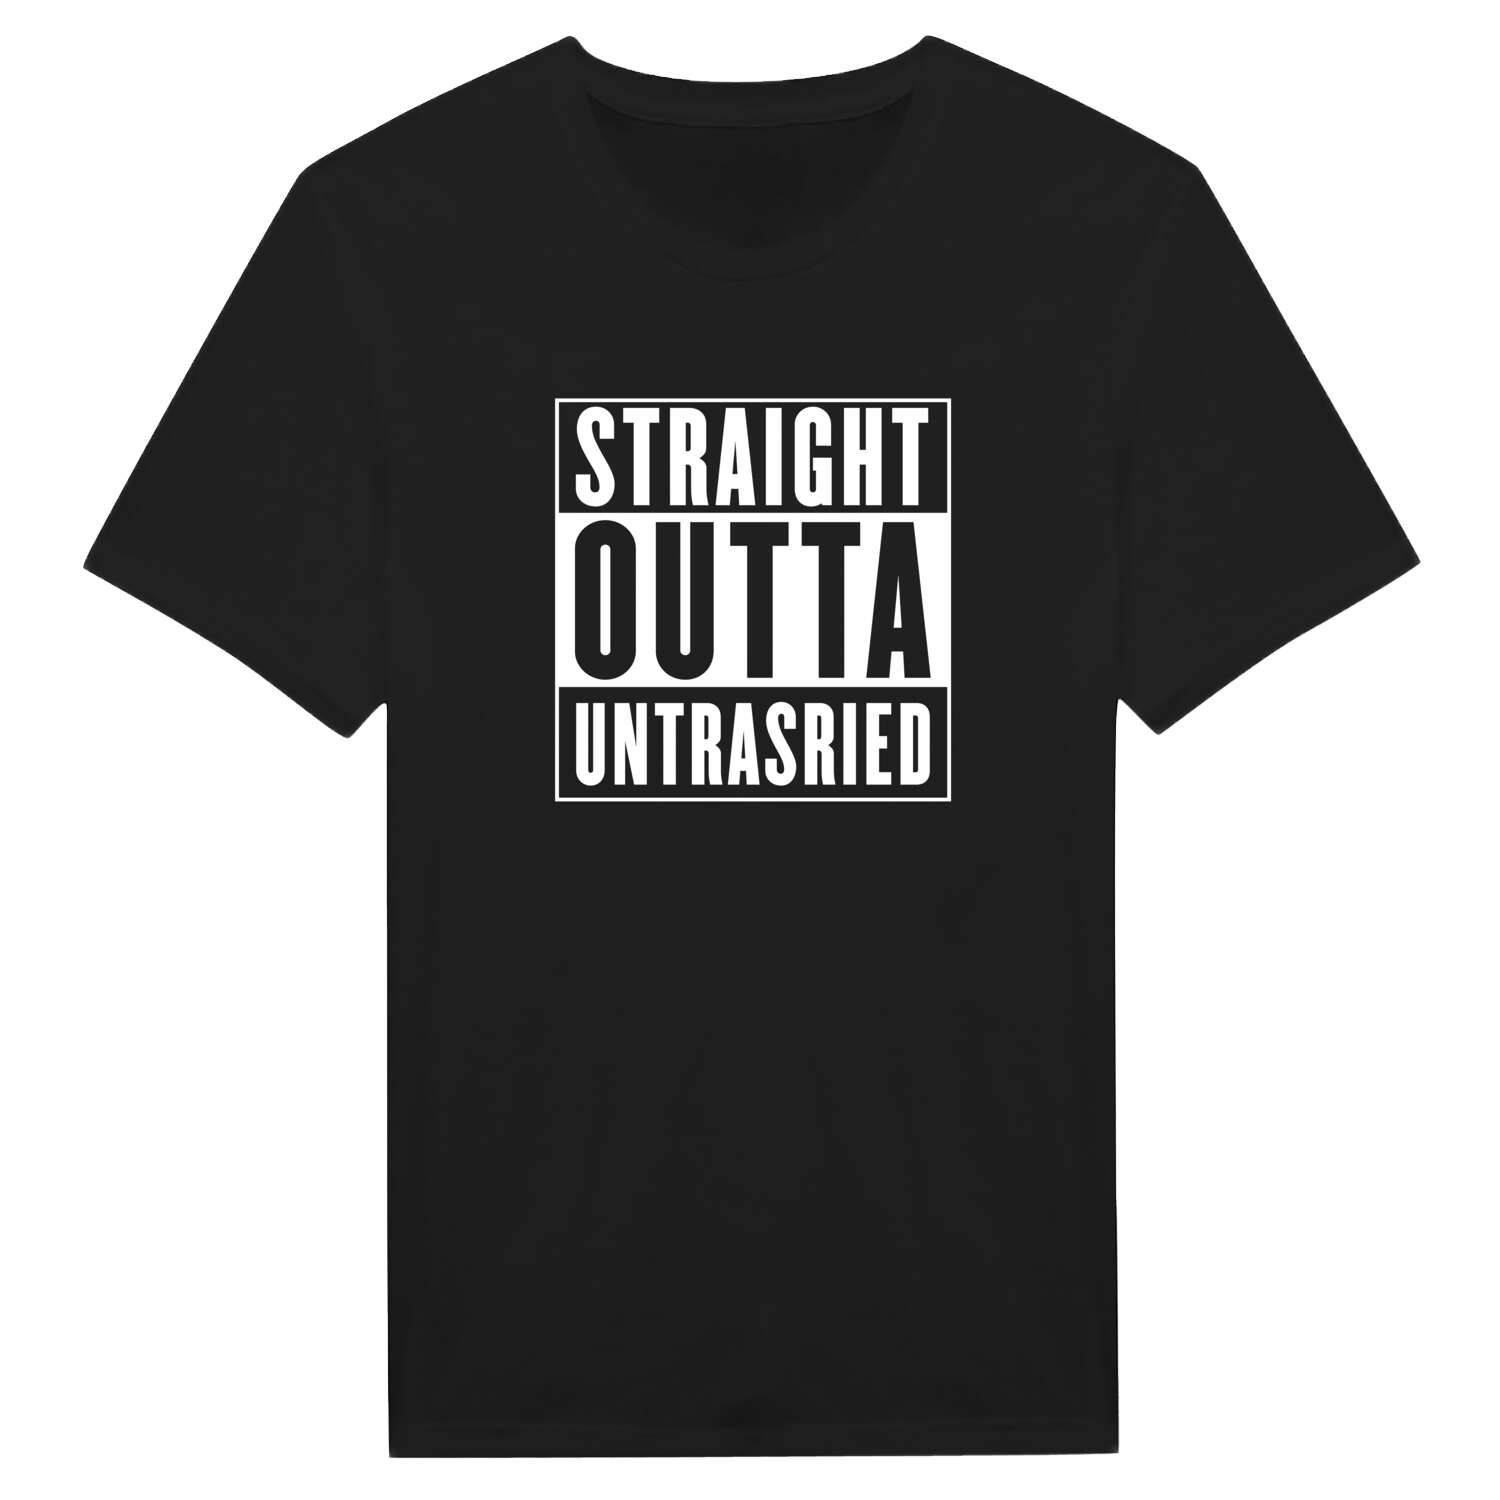 Untrasried T-Shirt »Straight Outta«